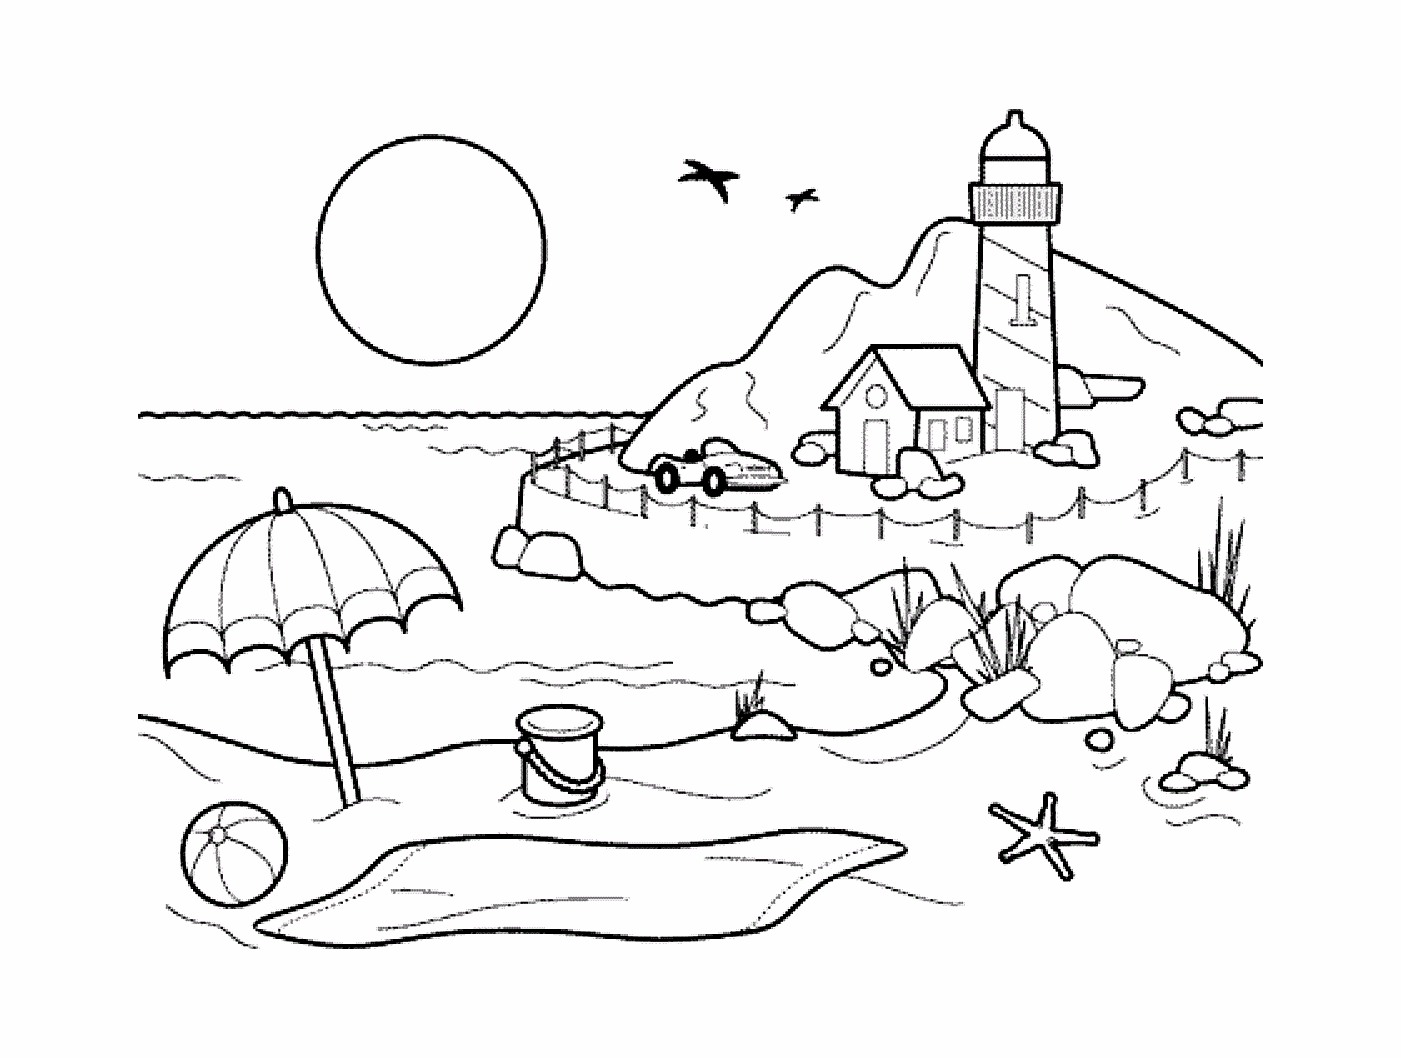 Simplistic landscape to color, perfect for beginners !